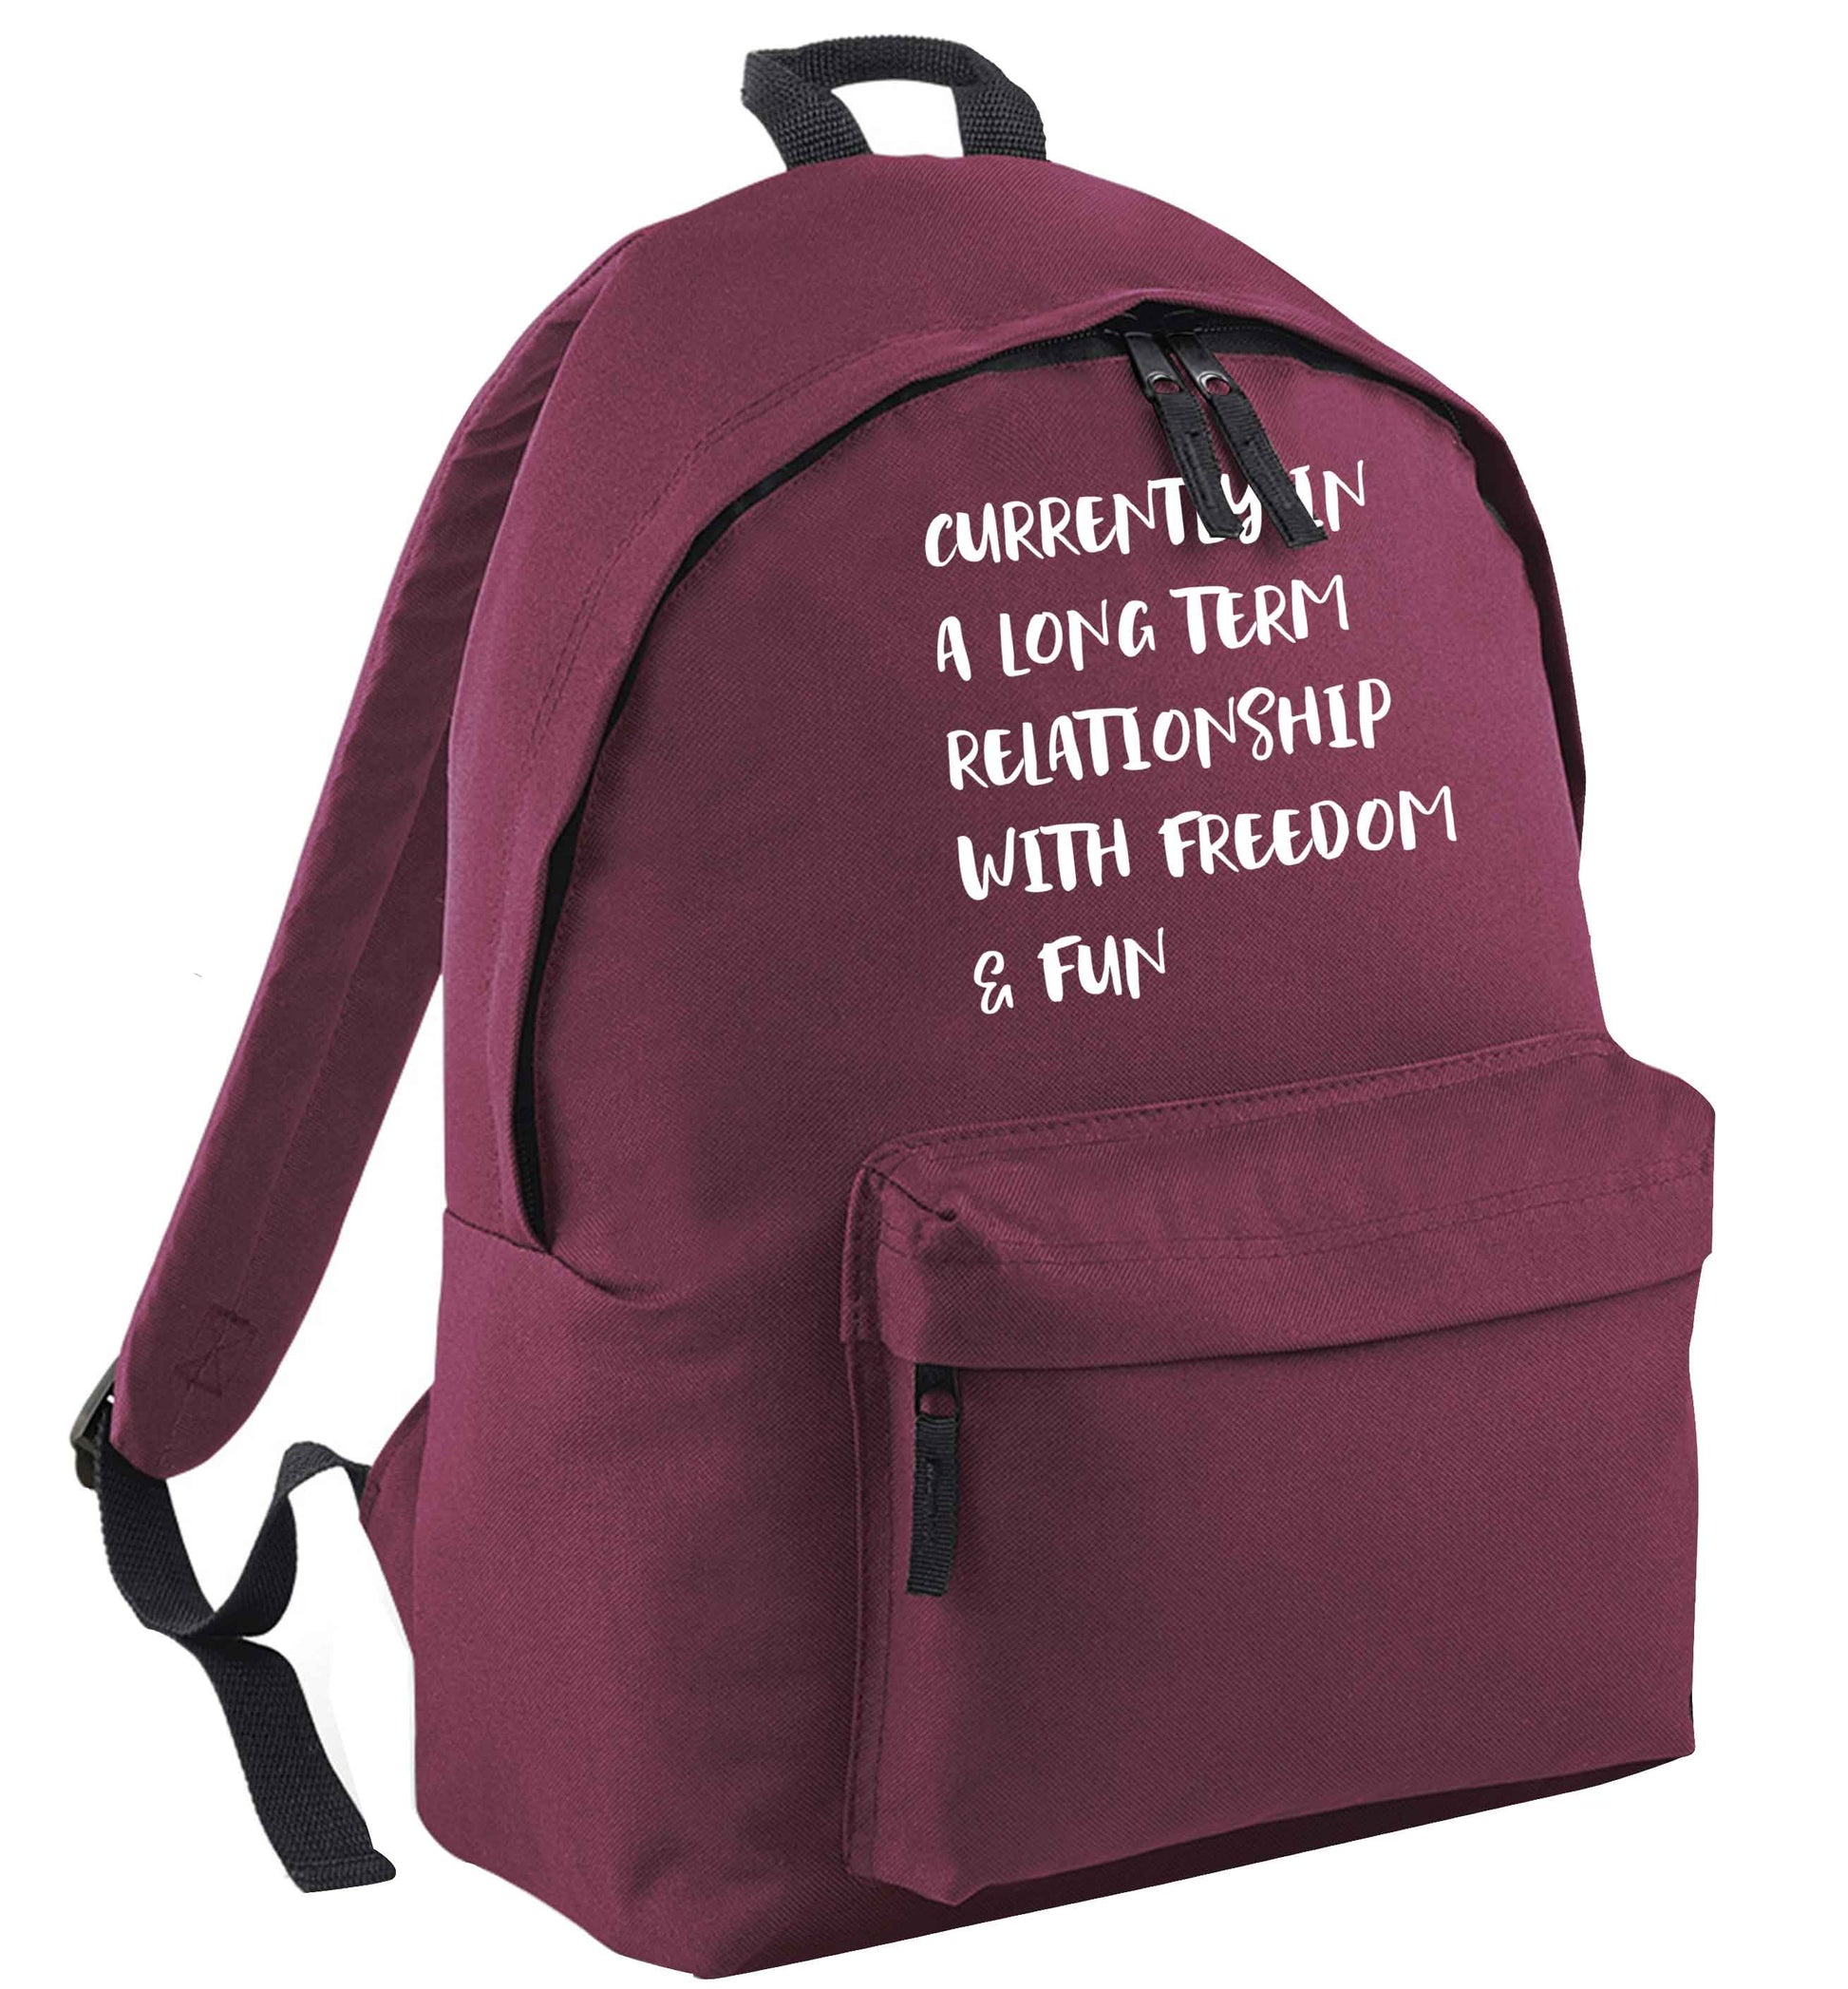 Currently in a long term relationship with freedom and fun maroon adults backpack